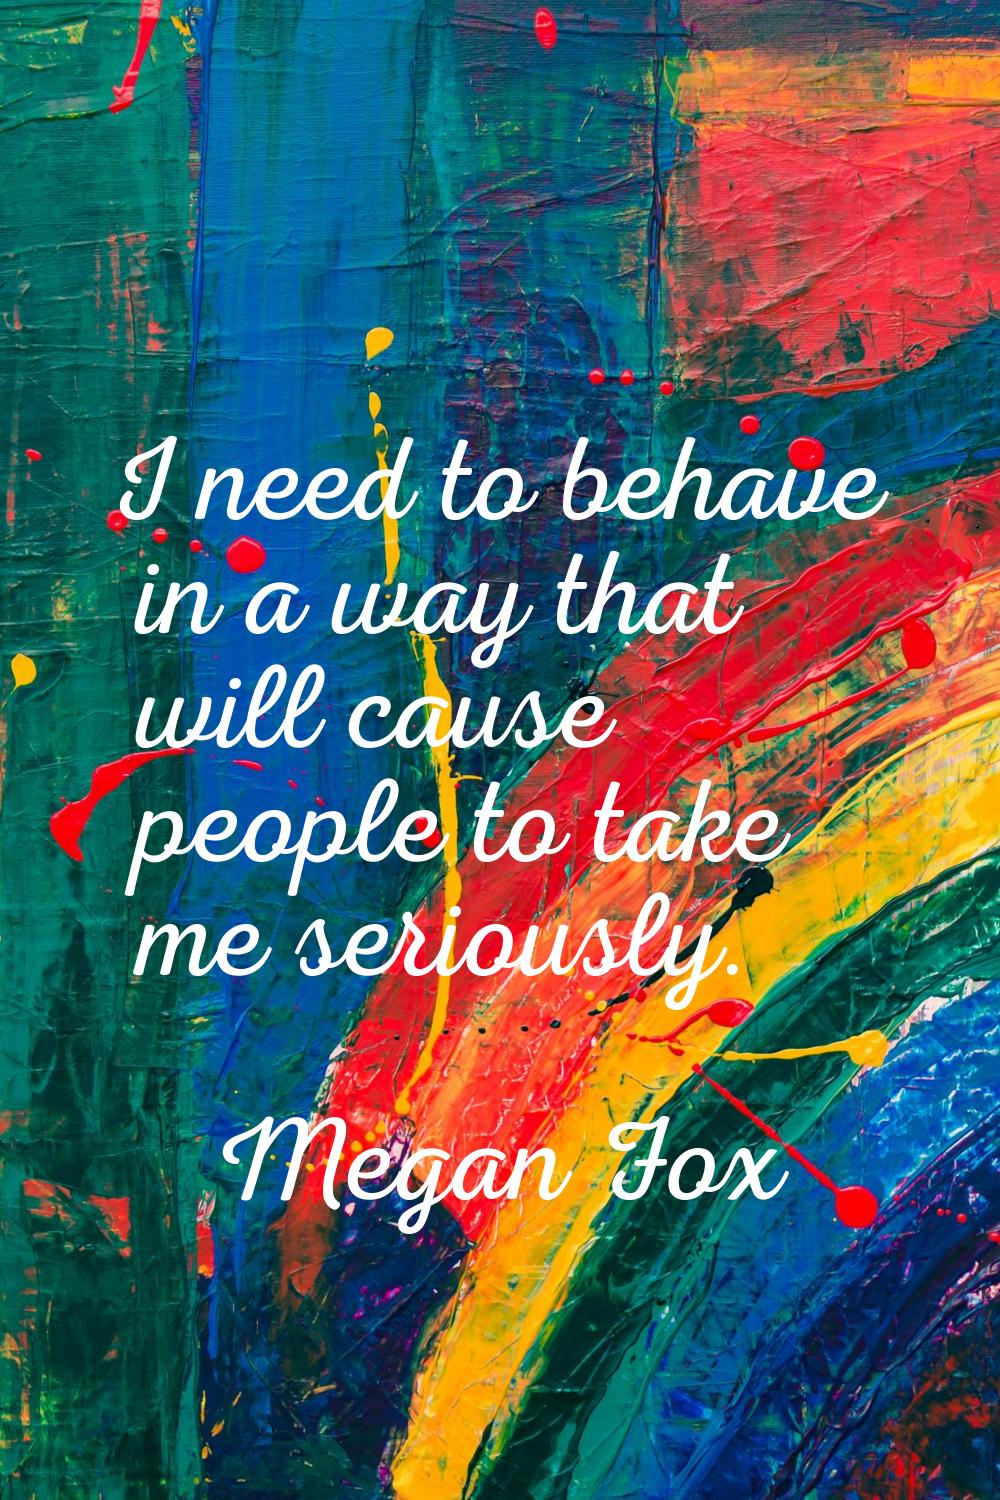 I need to behave in a way that will cause people to take me seriously.